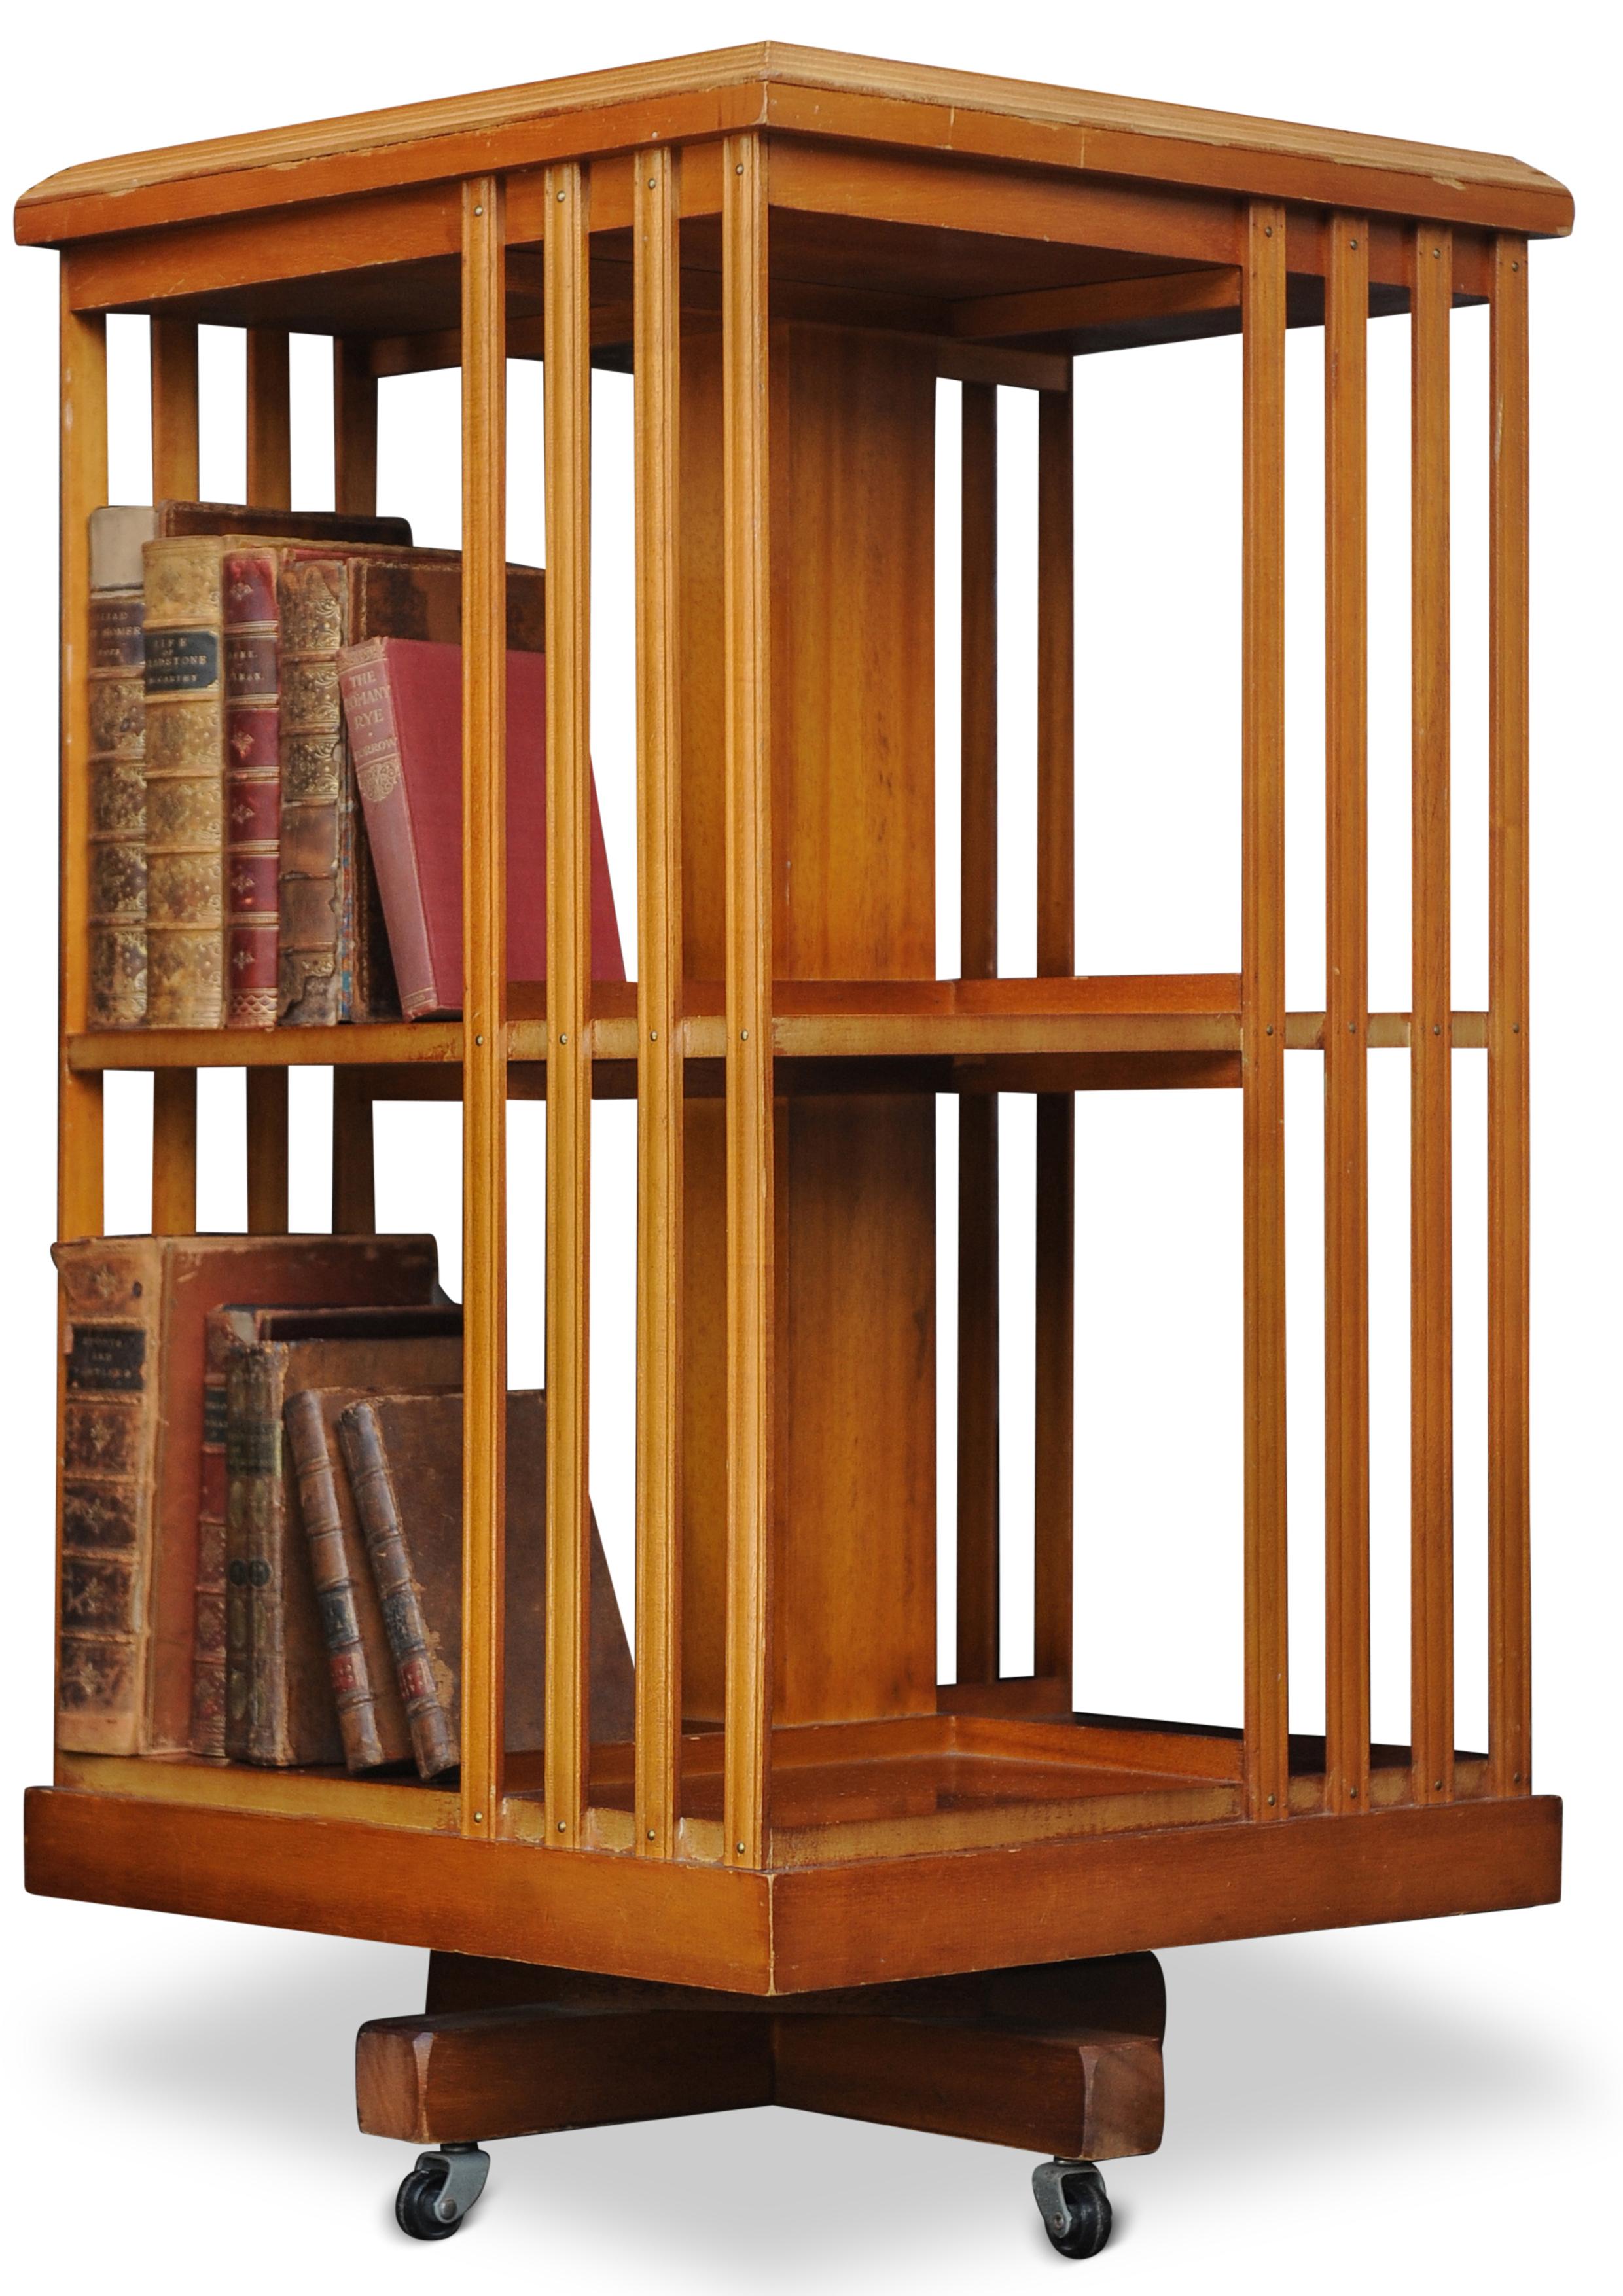 Regency Revival Revolving Sectional Two Tier Library Bookcase on Castors In Good Condition For Sale In High Wycombe, GB